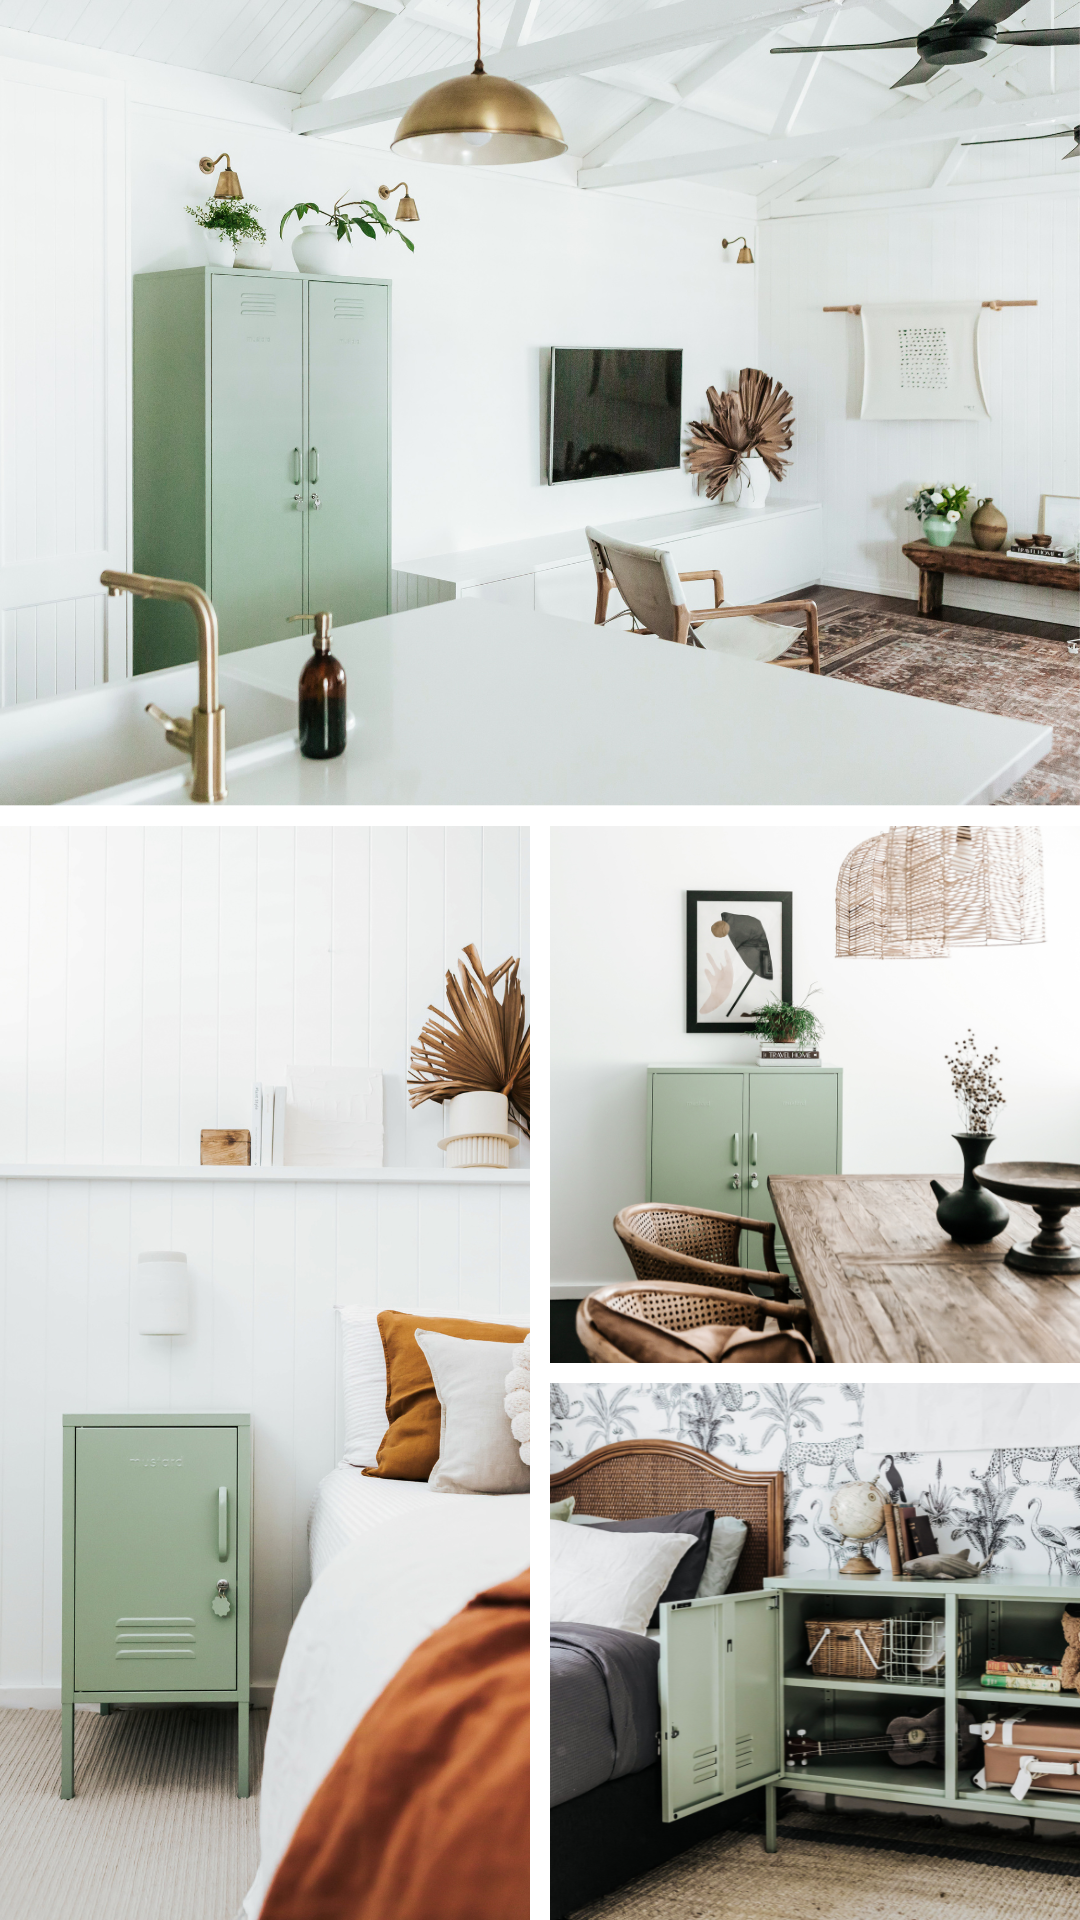 A collage of images featuring Sage green lockers paired with white walls and accents in rust, brown and brass.